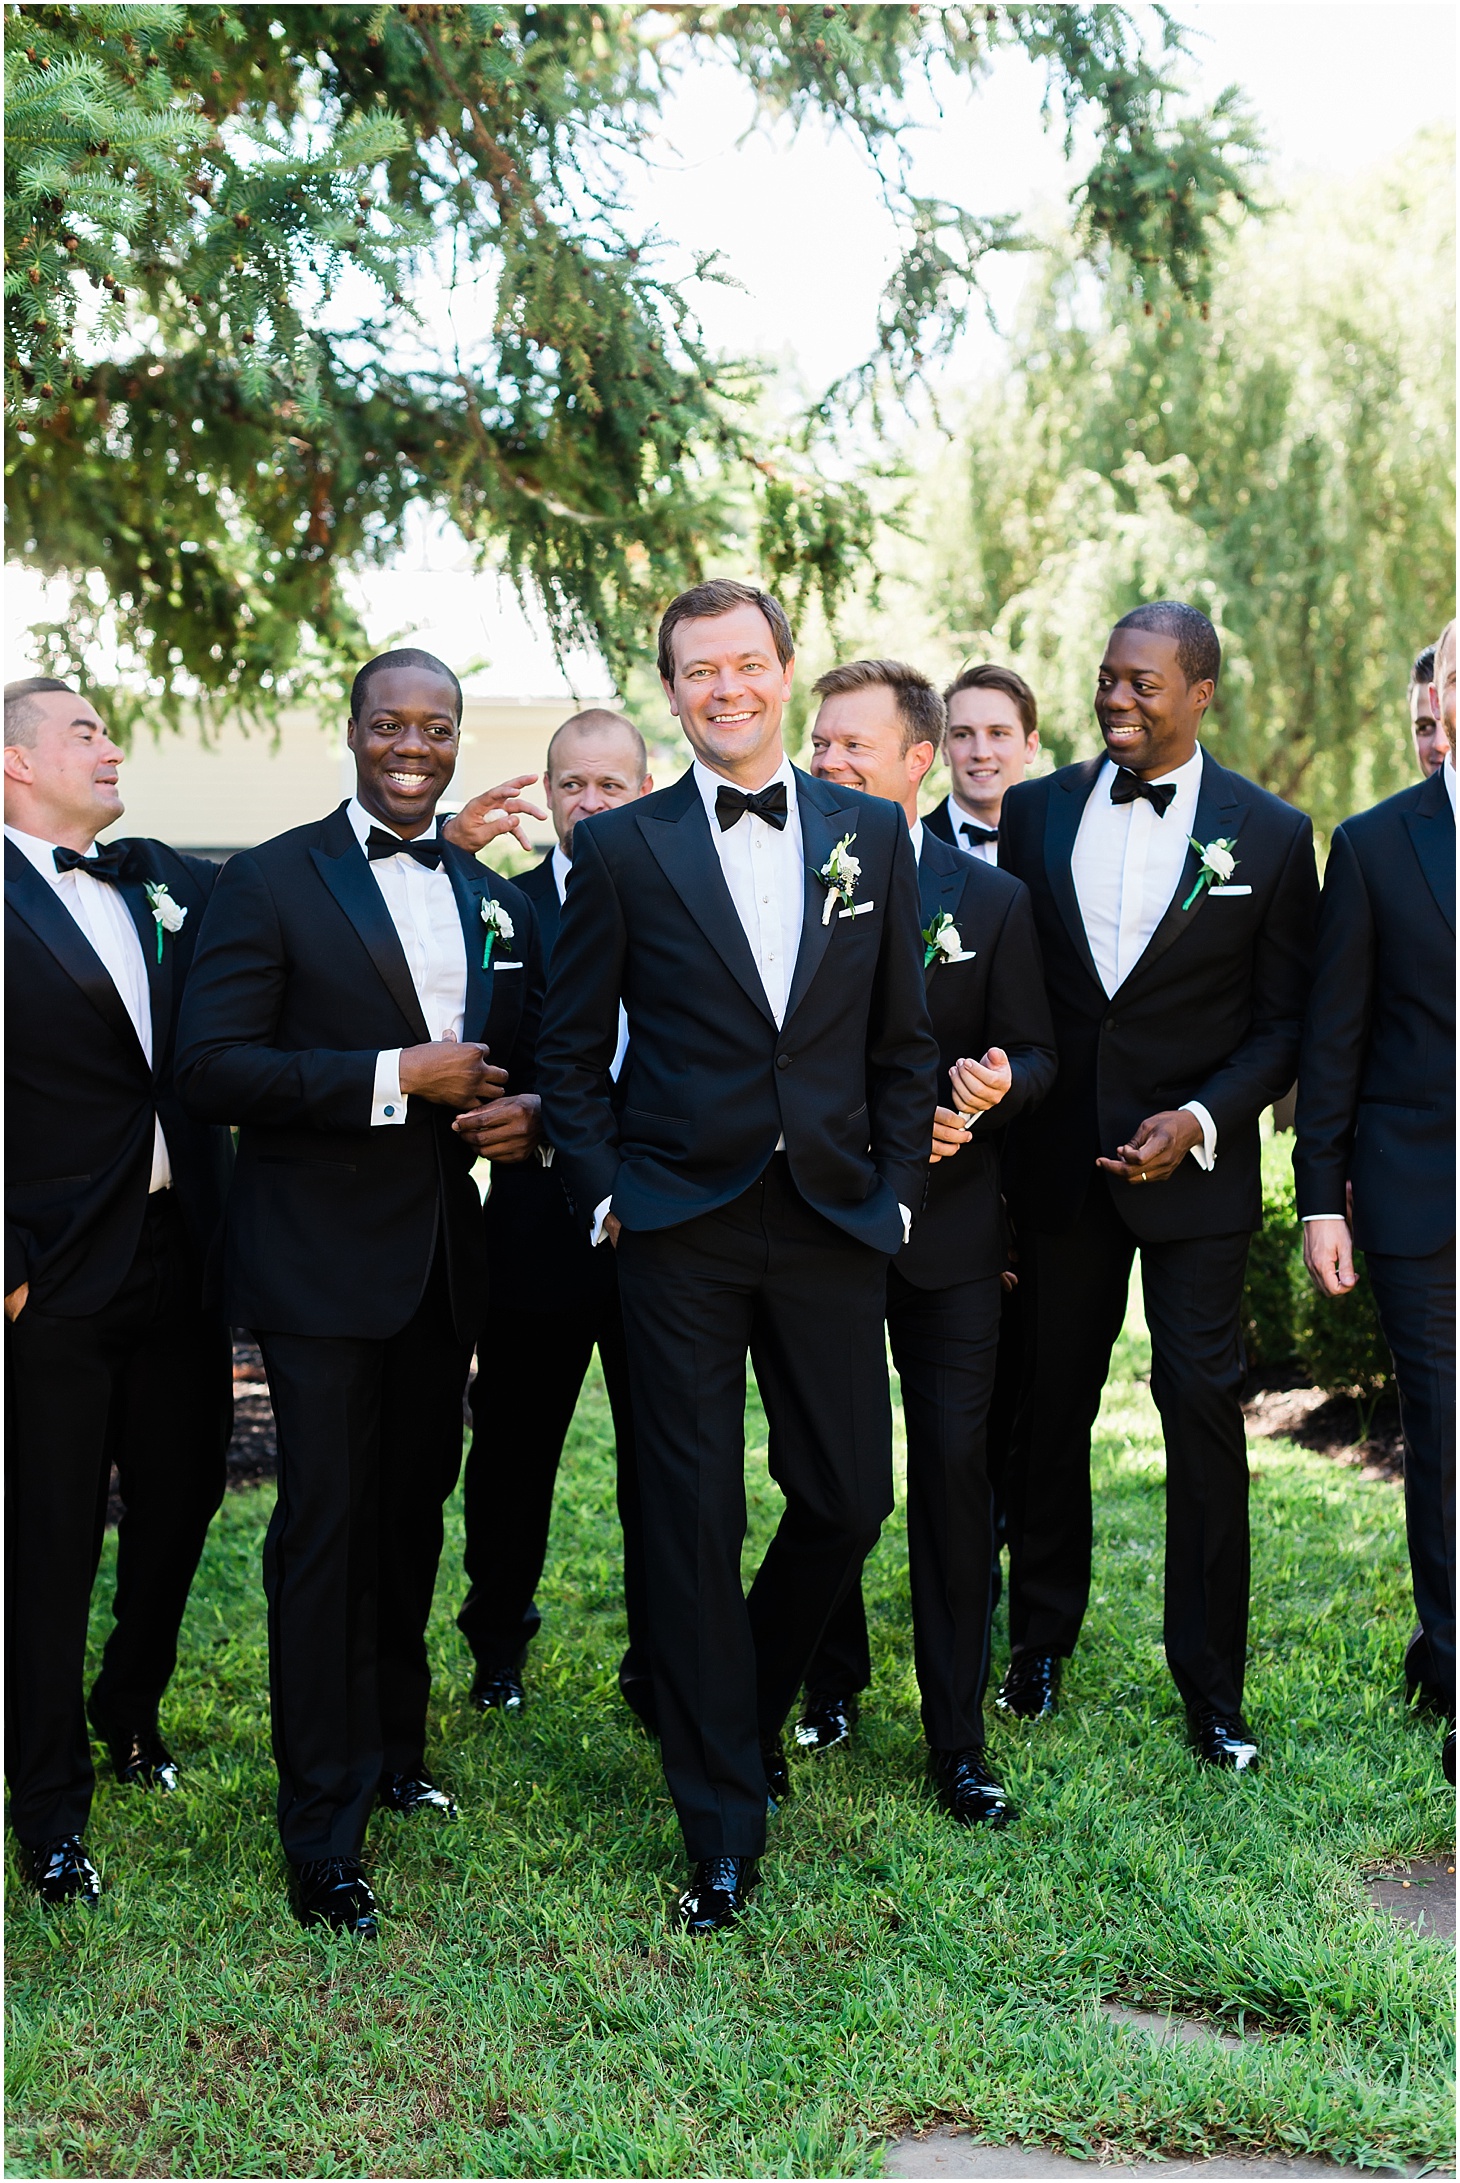 Groom and Groomsmen at the Inn at Willow Grove, Green and White Summer Wedding at The Inn at Willow Grove, Ceremony at St. Isidore the Farmer Catholic Church, Sarah Bradshaw Photography, DC Wedding Photographer